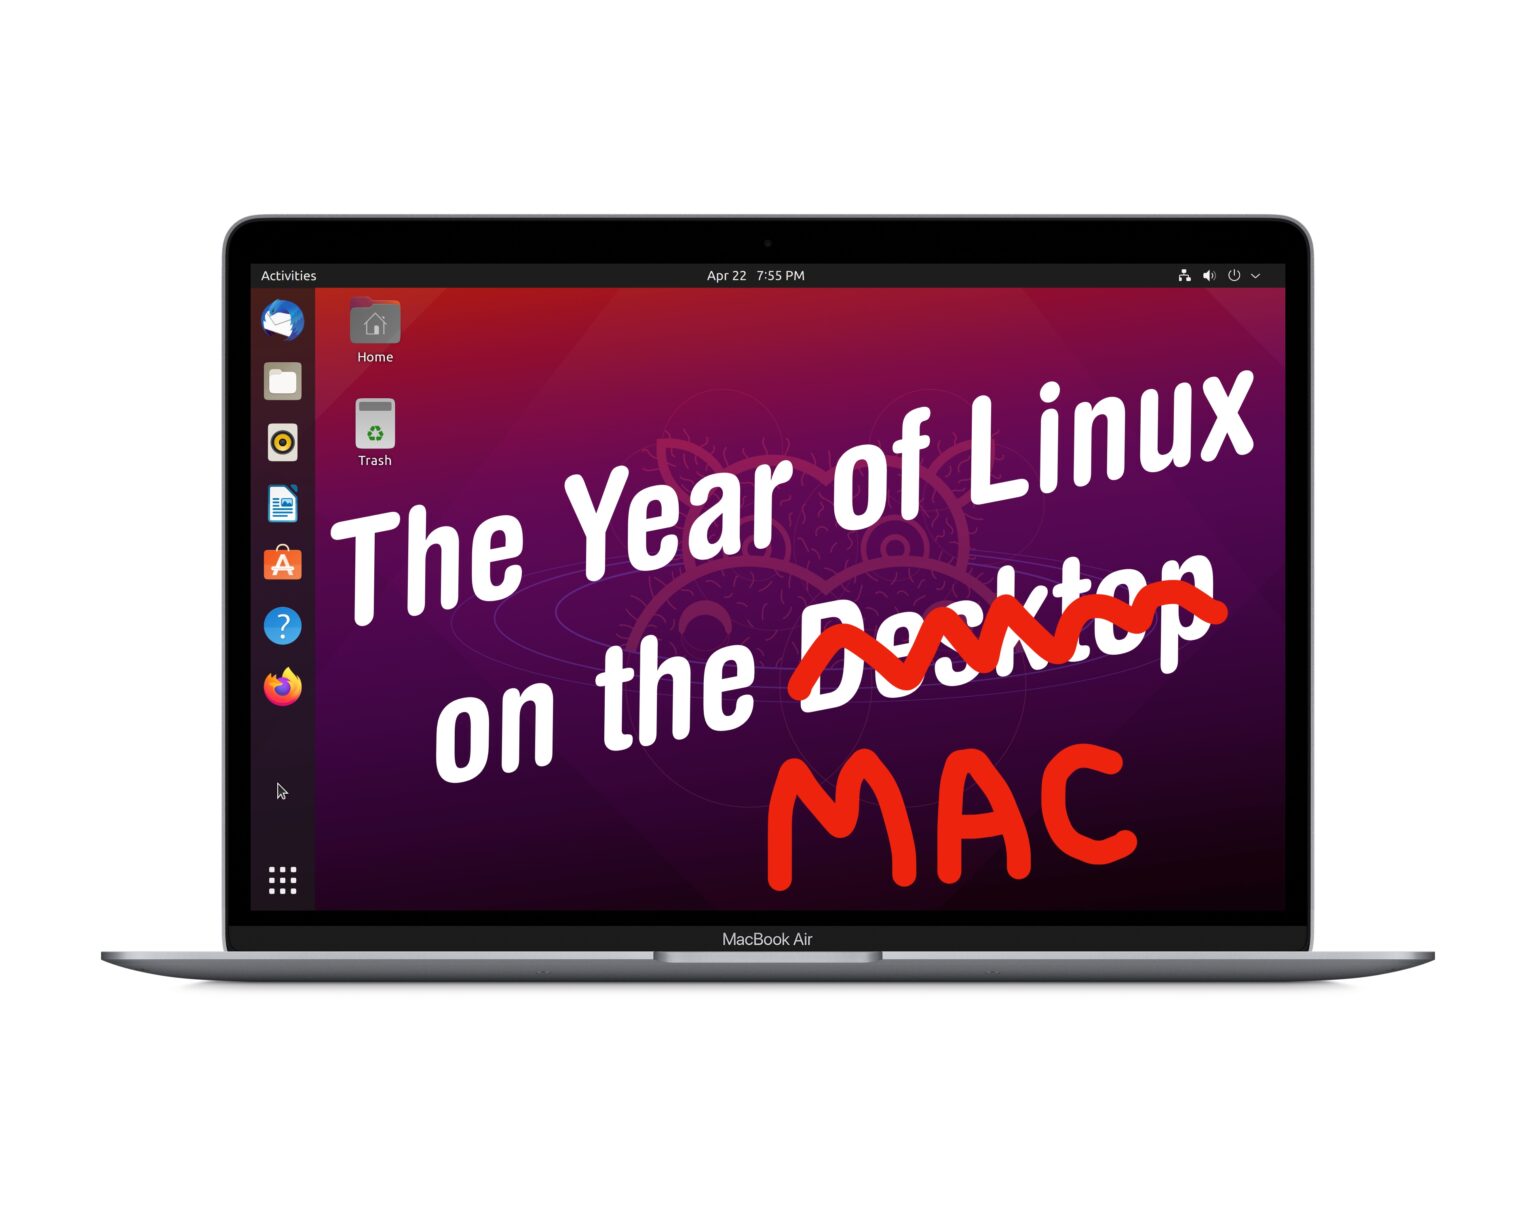 The Year of Linux on the Mac